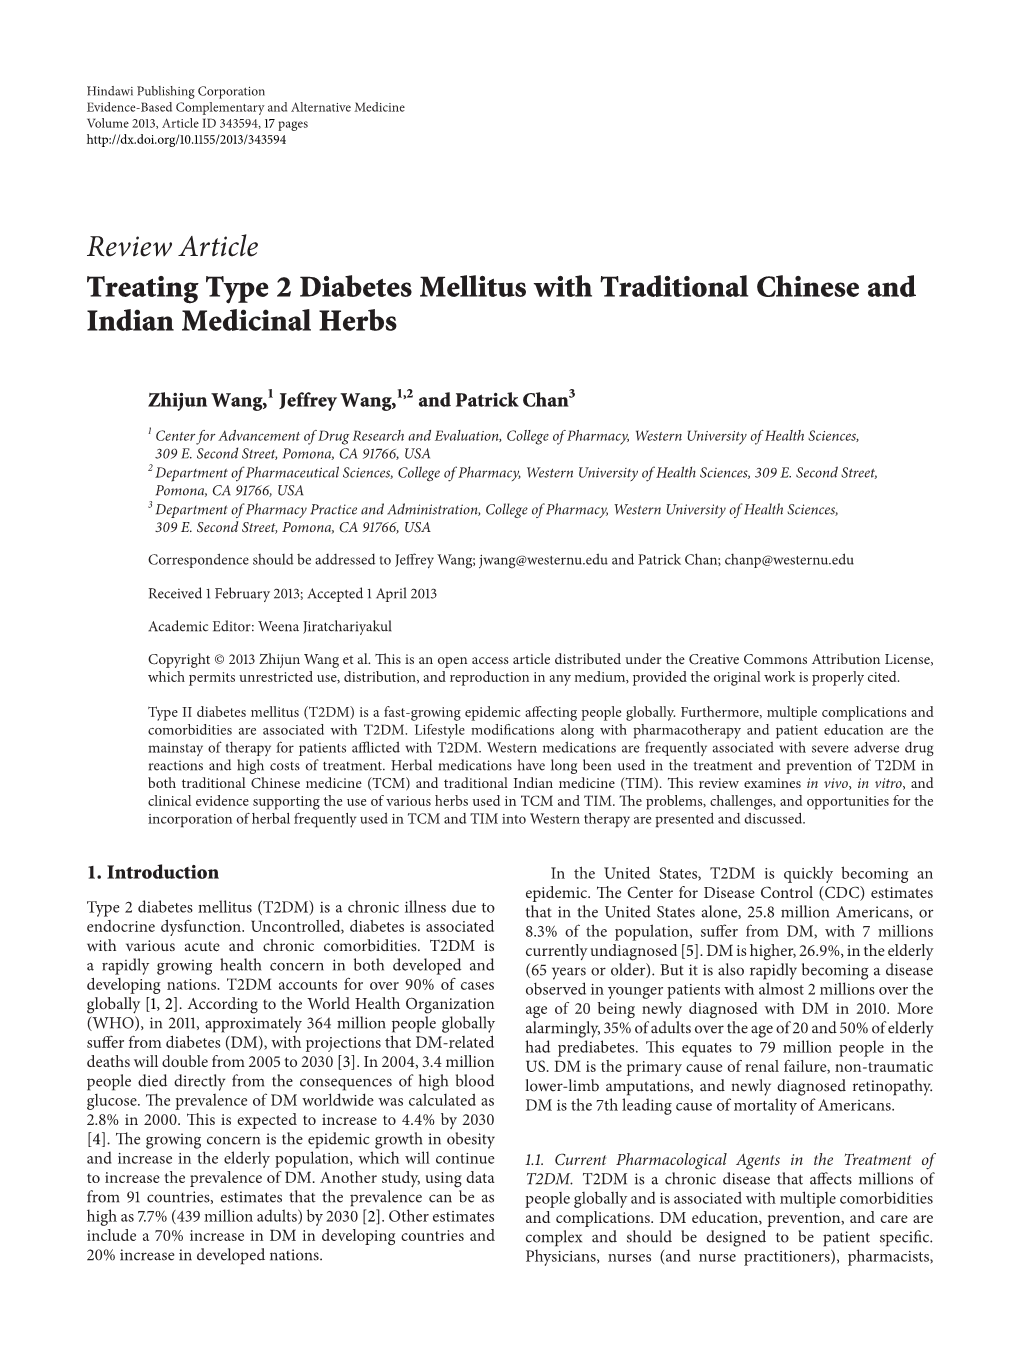 Review Article Treating Type 2 Diabetes Mellitus with Traditional Chinese and Indian Medicinal Herbs